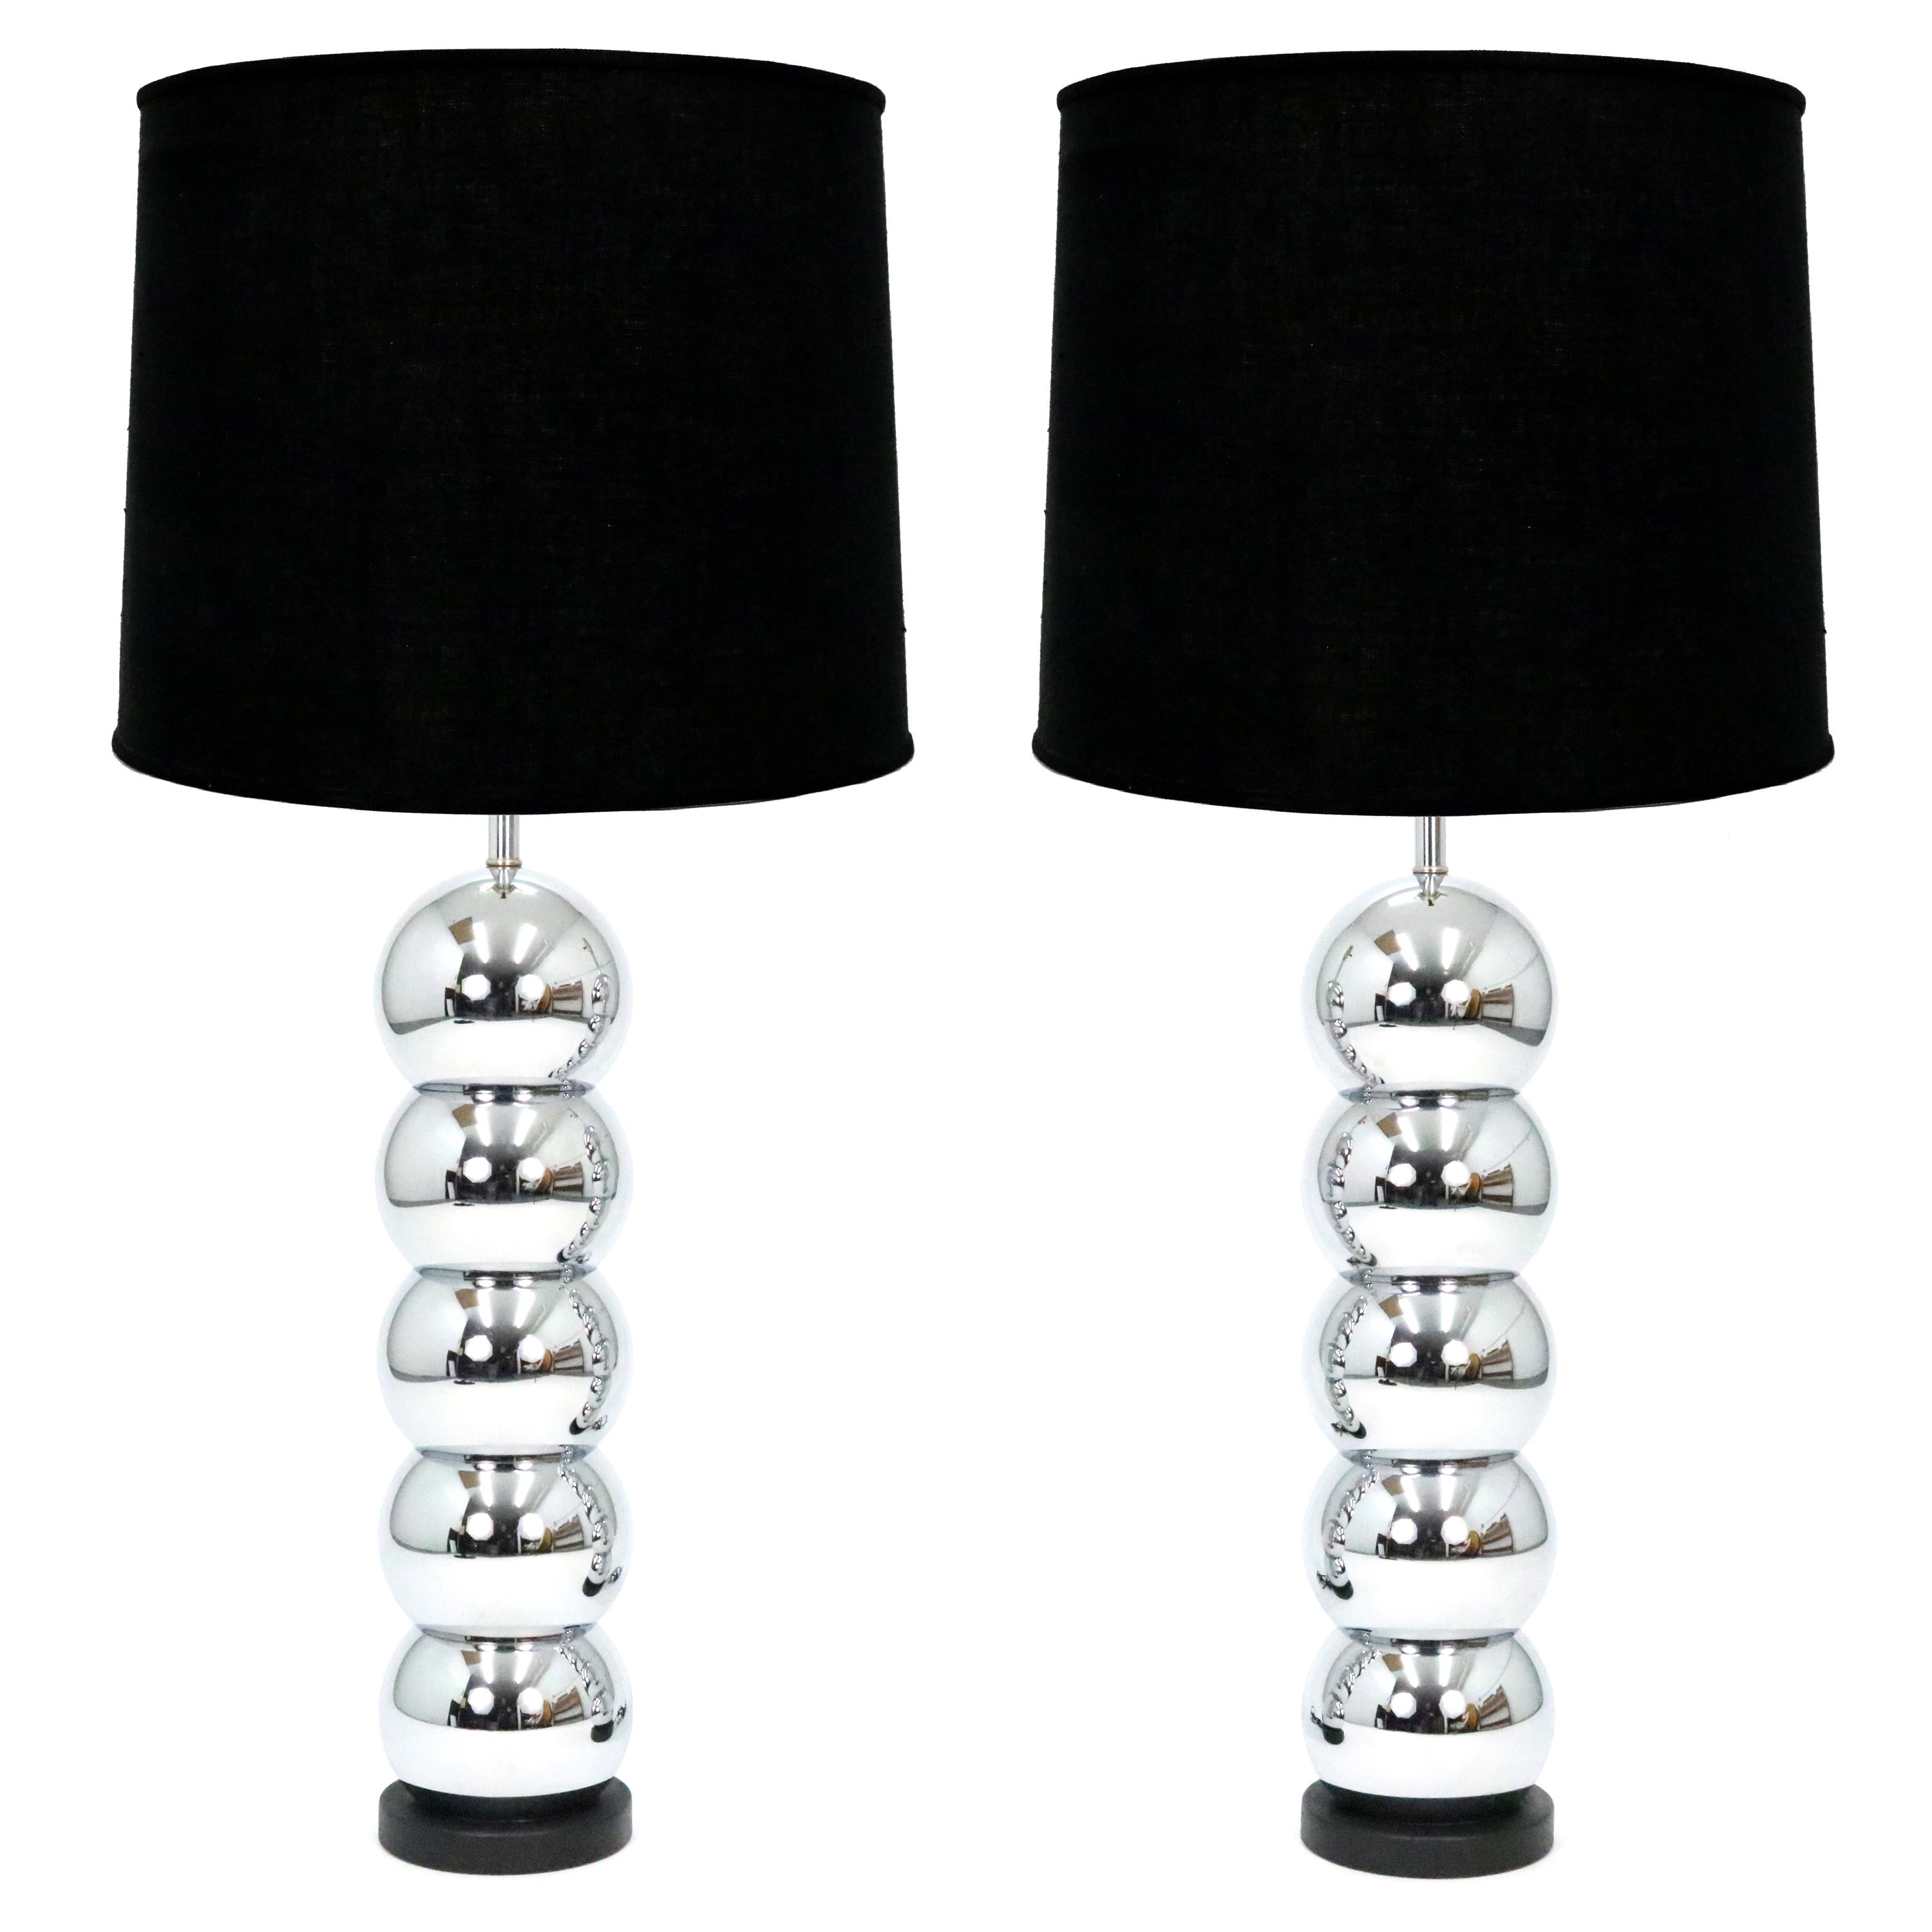 George Kovacs Style 5-Tier Chrome Ball Lamps